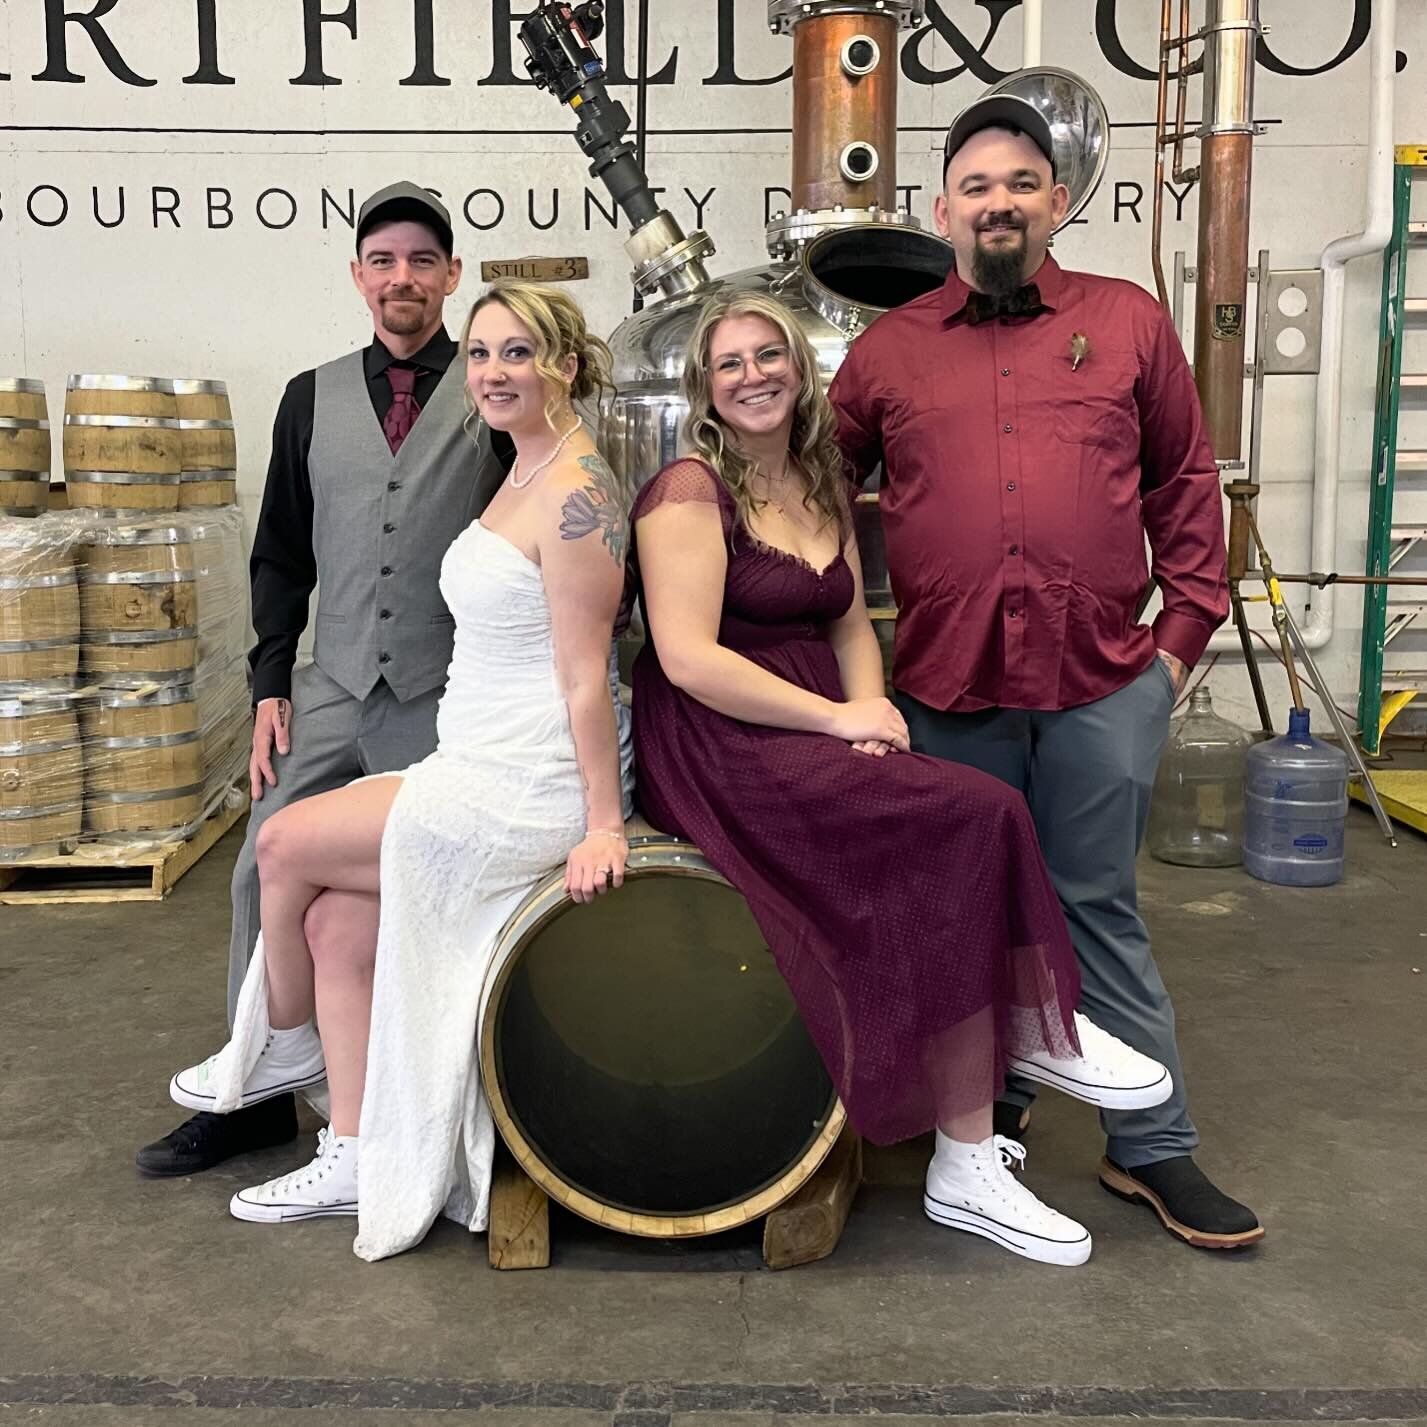 Congrats to Ryan and Ashley! Thanks for stopping by after your wedding and making us a part of your big day. Wishing you happiness for many years to come. Cheers! 🥂🥃🍻